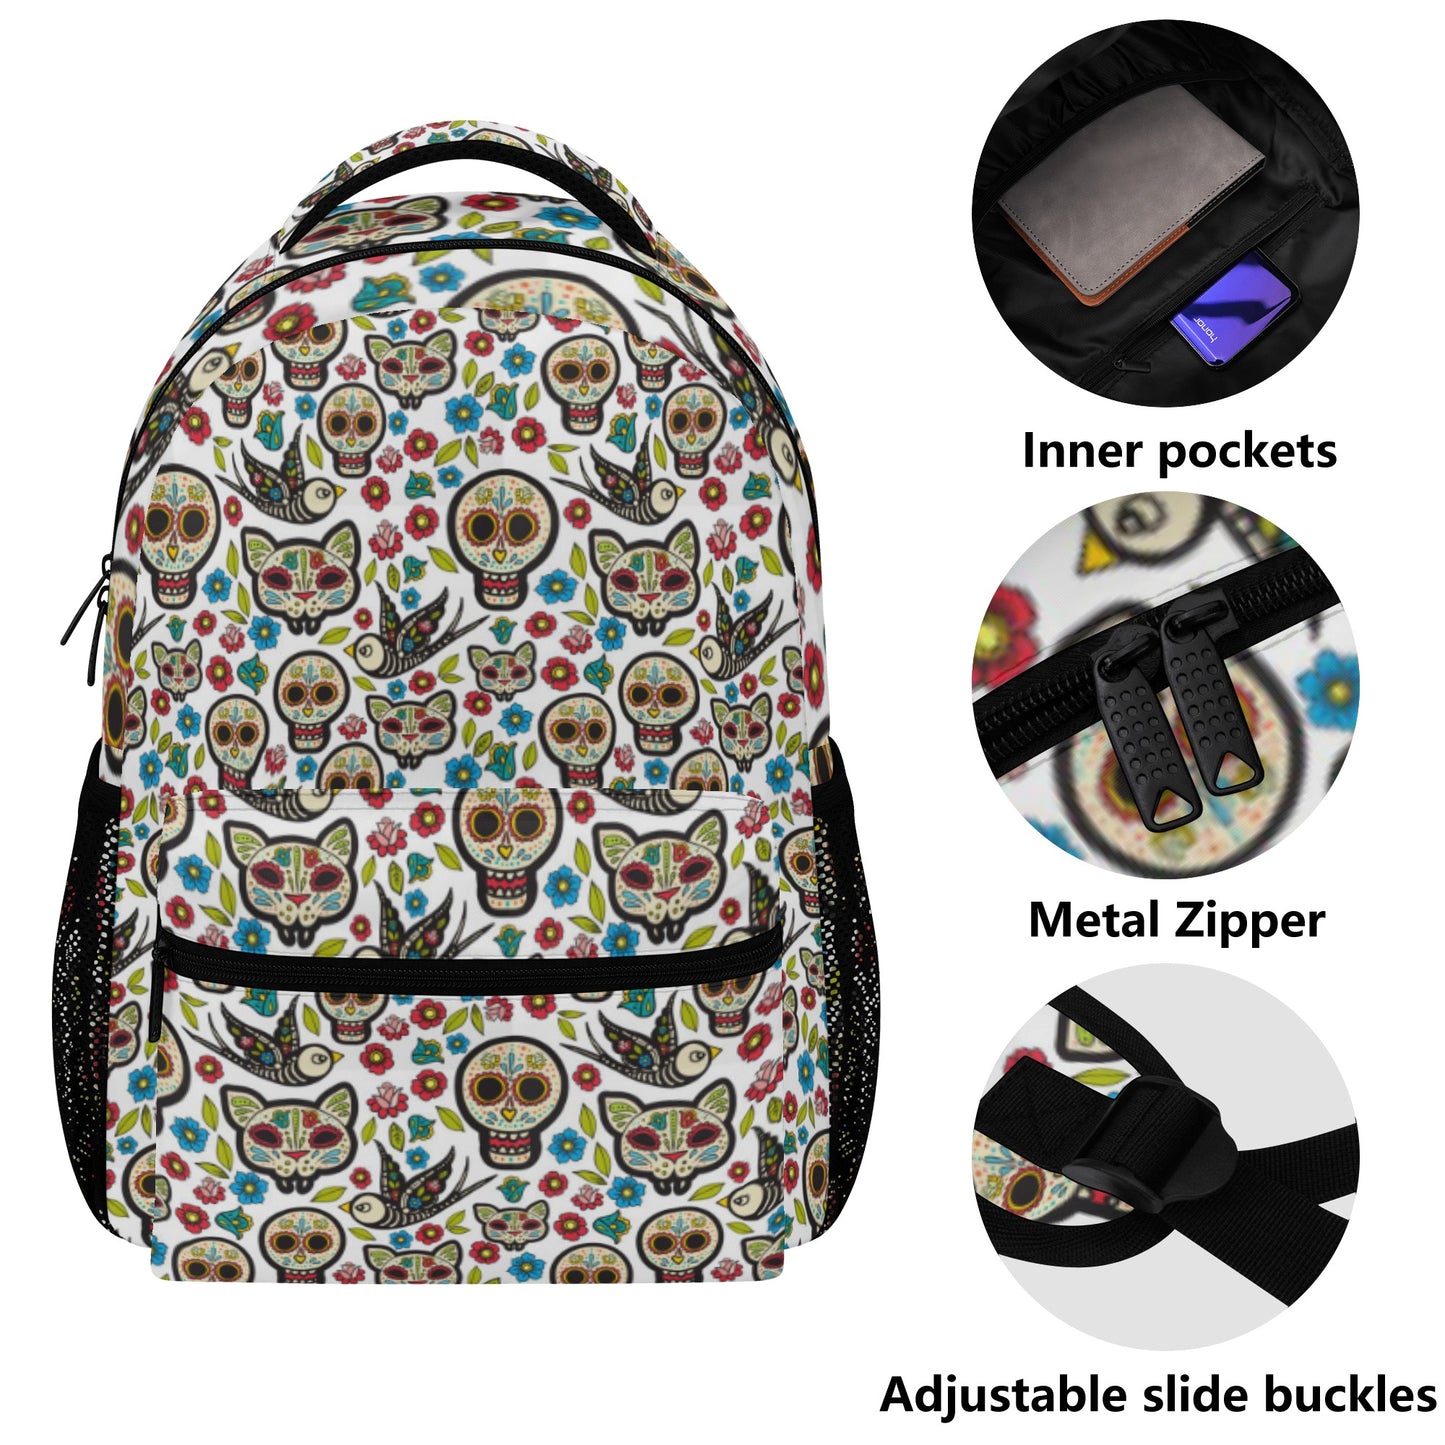 Day of the dead sugar skull gothic New Casual Style School Bakcpack